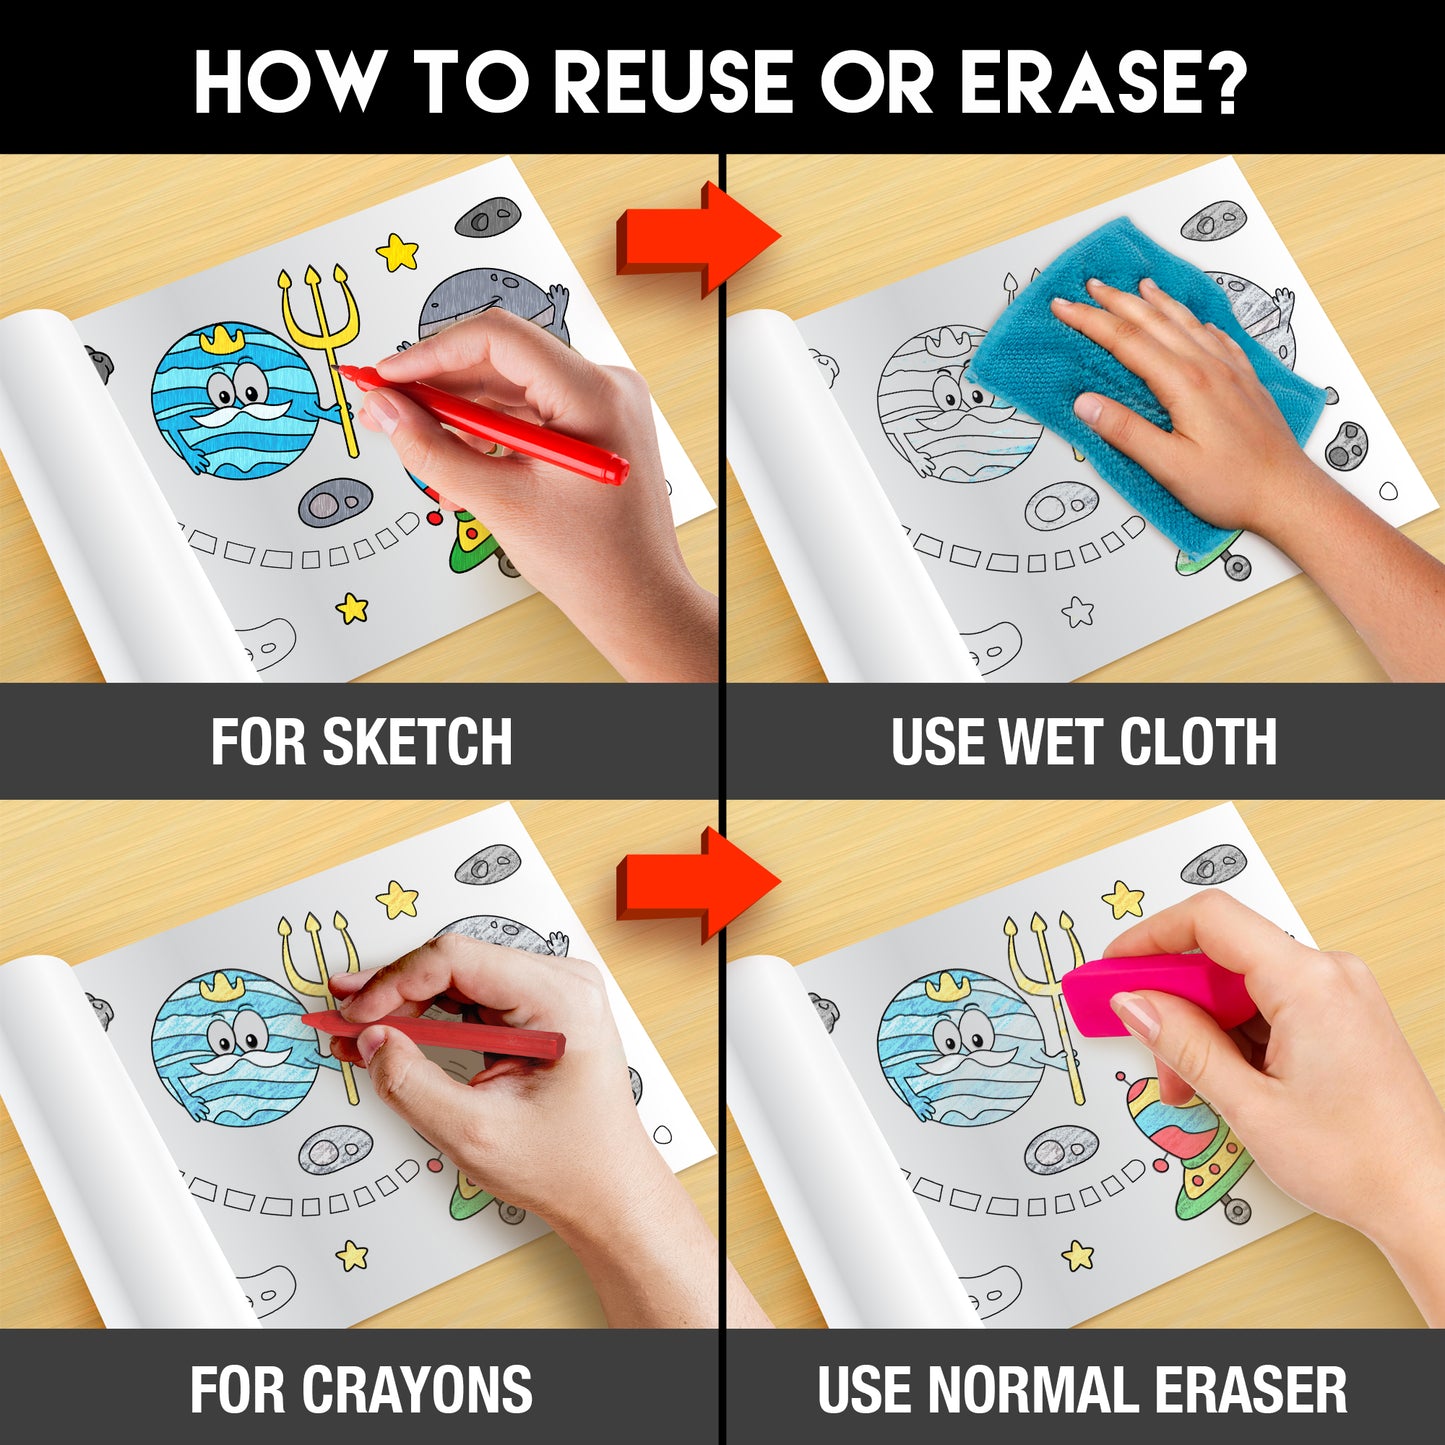 The image has a black background with four pictures demonstrating how to reuse or erase: the first picture depicts sketching on the sheet, the second shows using a wet cloth to remove sketches, the third image displays crayons colouring on the sheet, and the fourth image illustrates erasing crayons with a regular eraser.